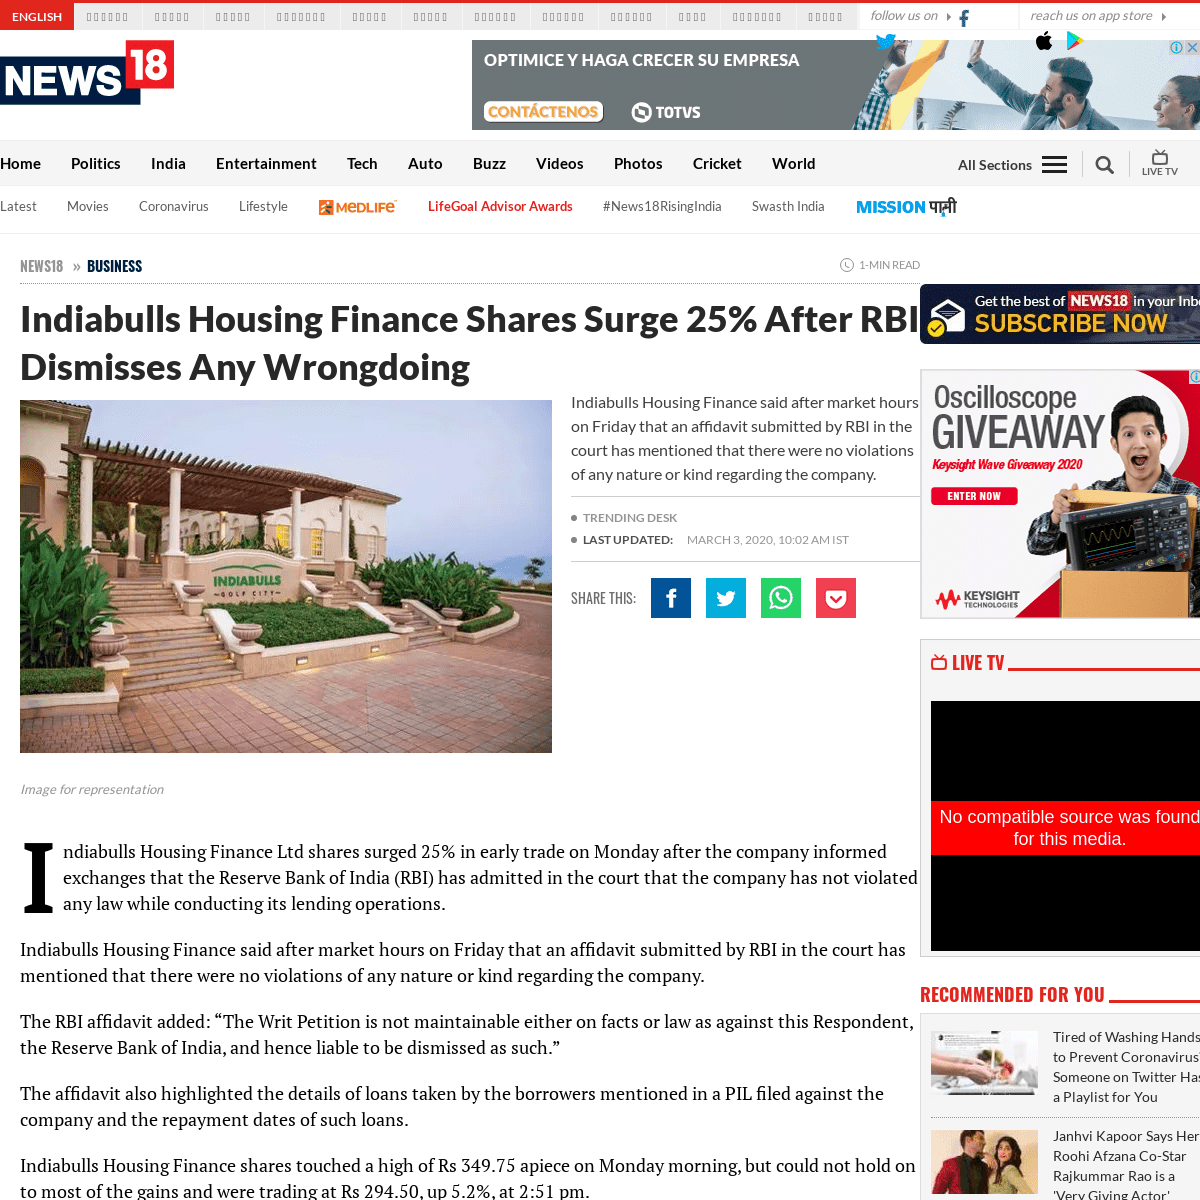 A complete backup of www.news18.com/news/business/indiabulls-housing-finance-shares-surge-25-after-rbi-dismisses-any-wrongdoing-